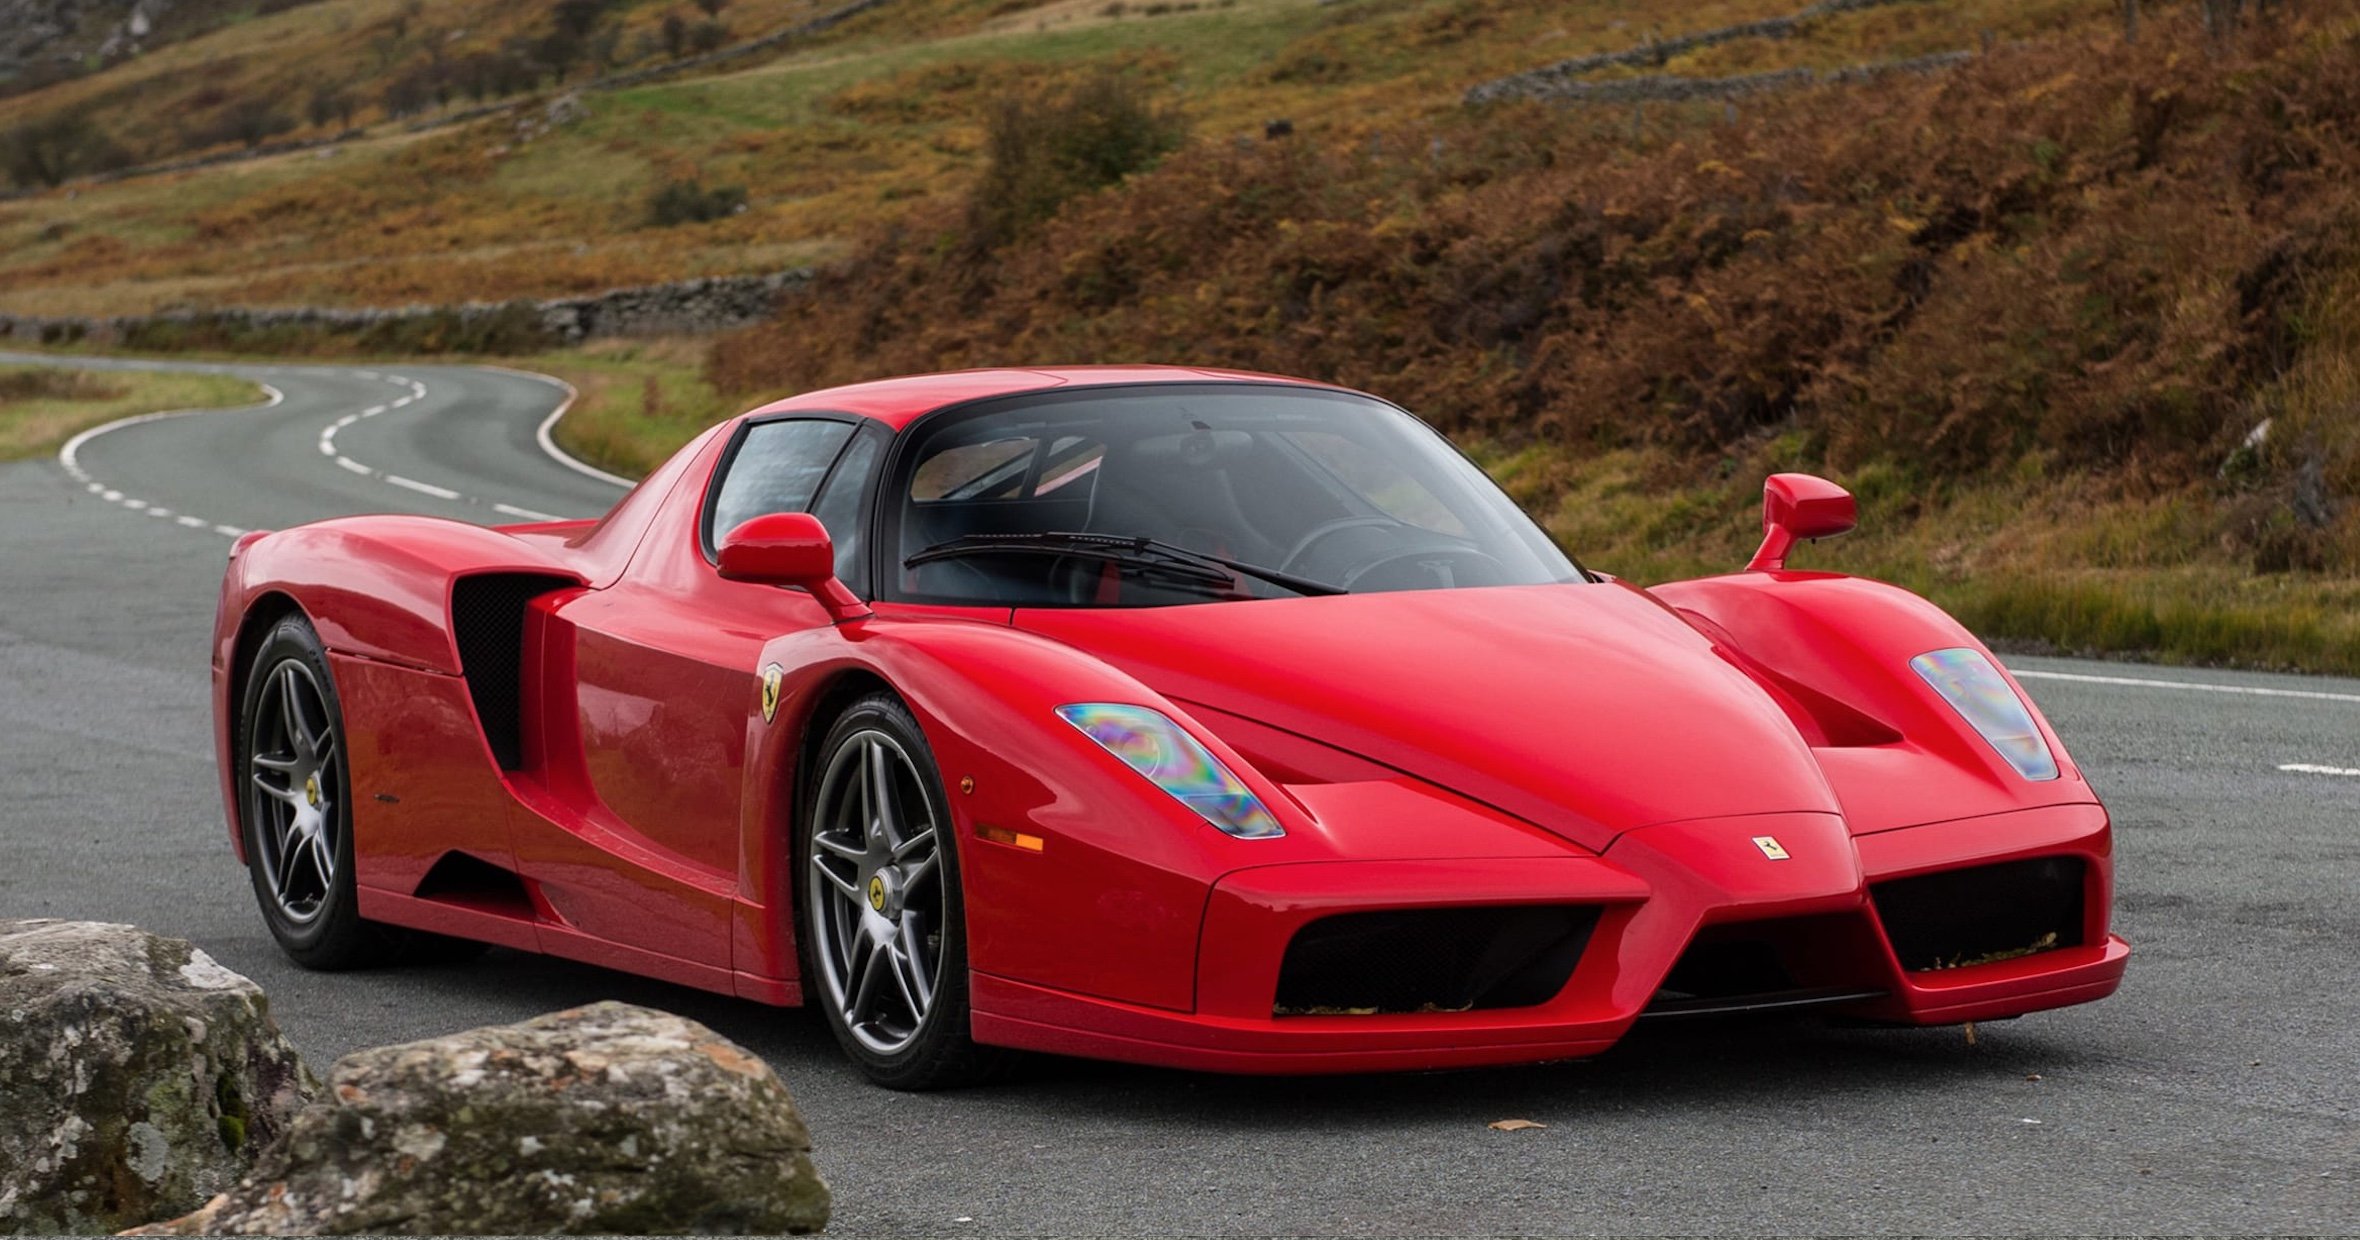 Ferrari Enzo: history and specs of an icon - Automotive Daily